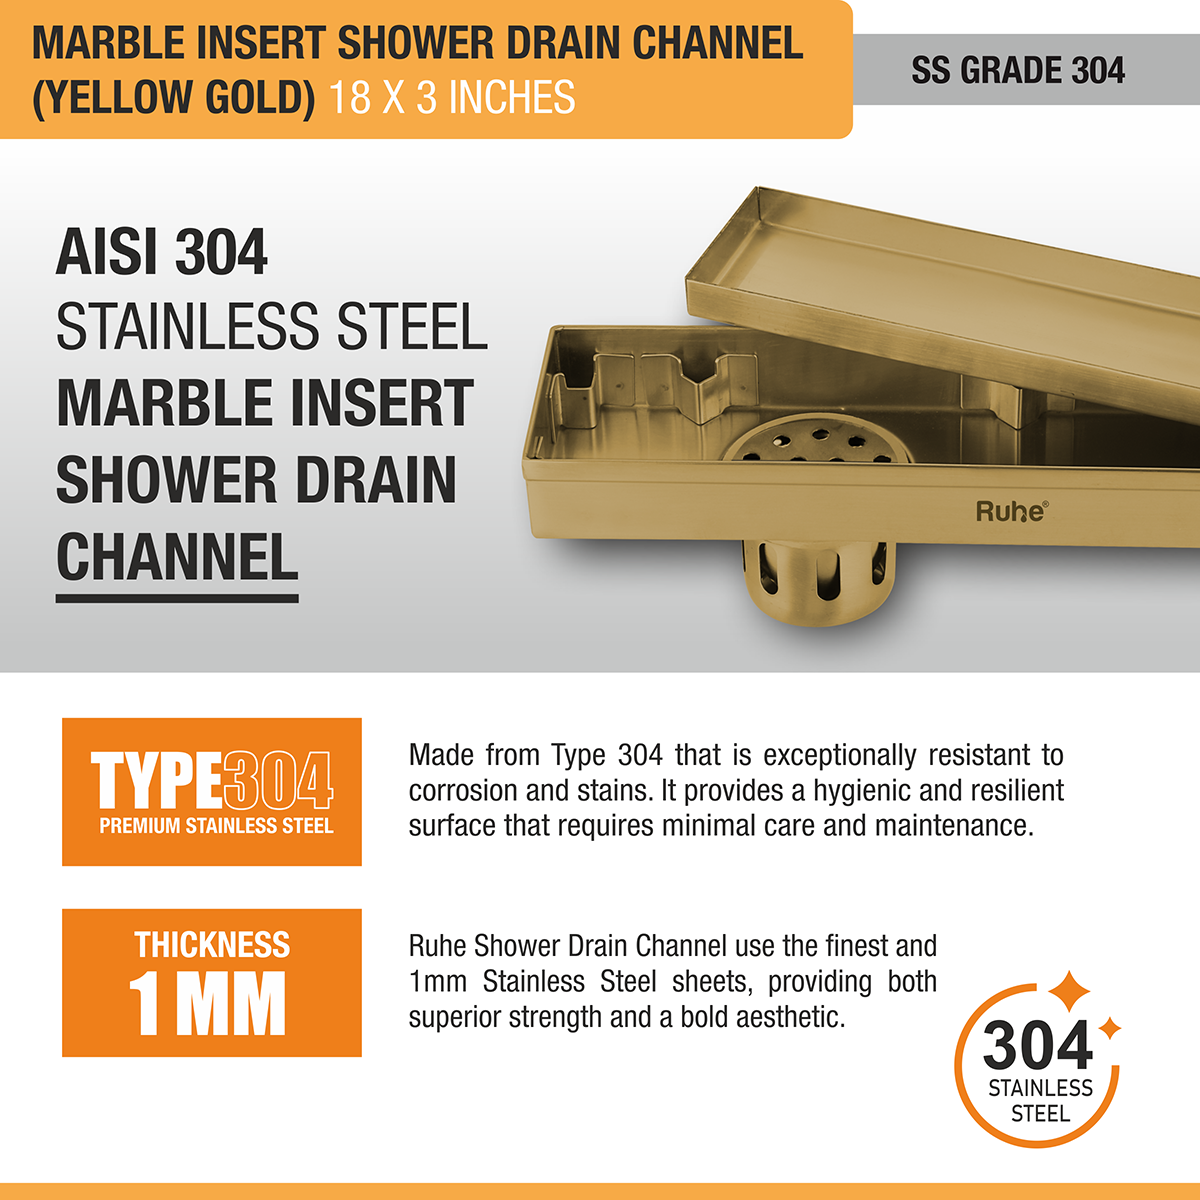 Marble Insert Shower Drain Channel (18 x 3 Inches) YELLOW GOLD PVD Coated stainless steel